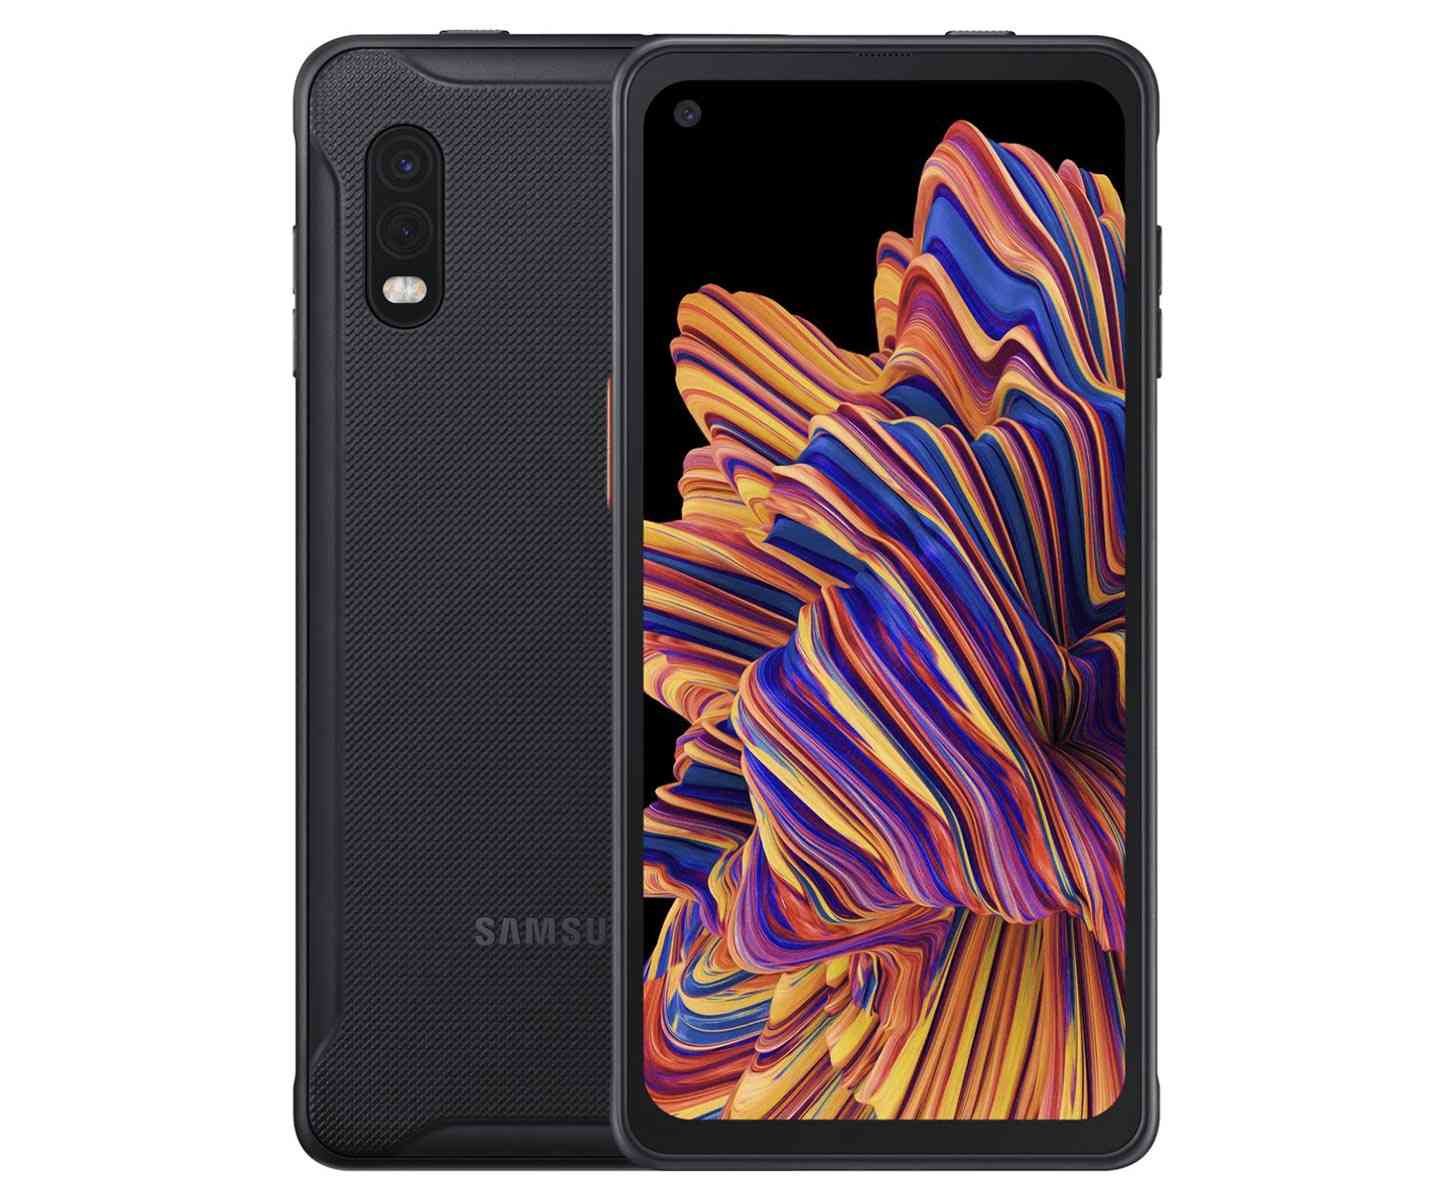 Samsung Galaxy XCover Pro official